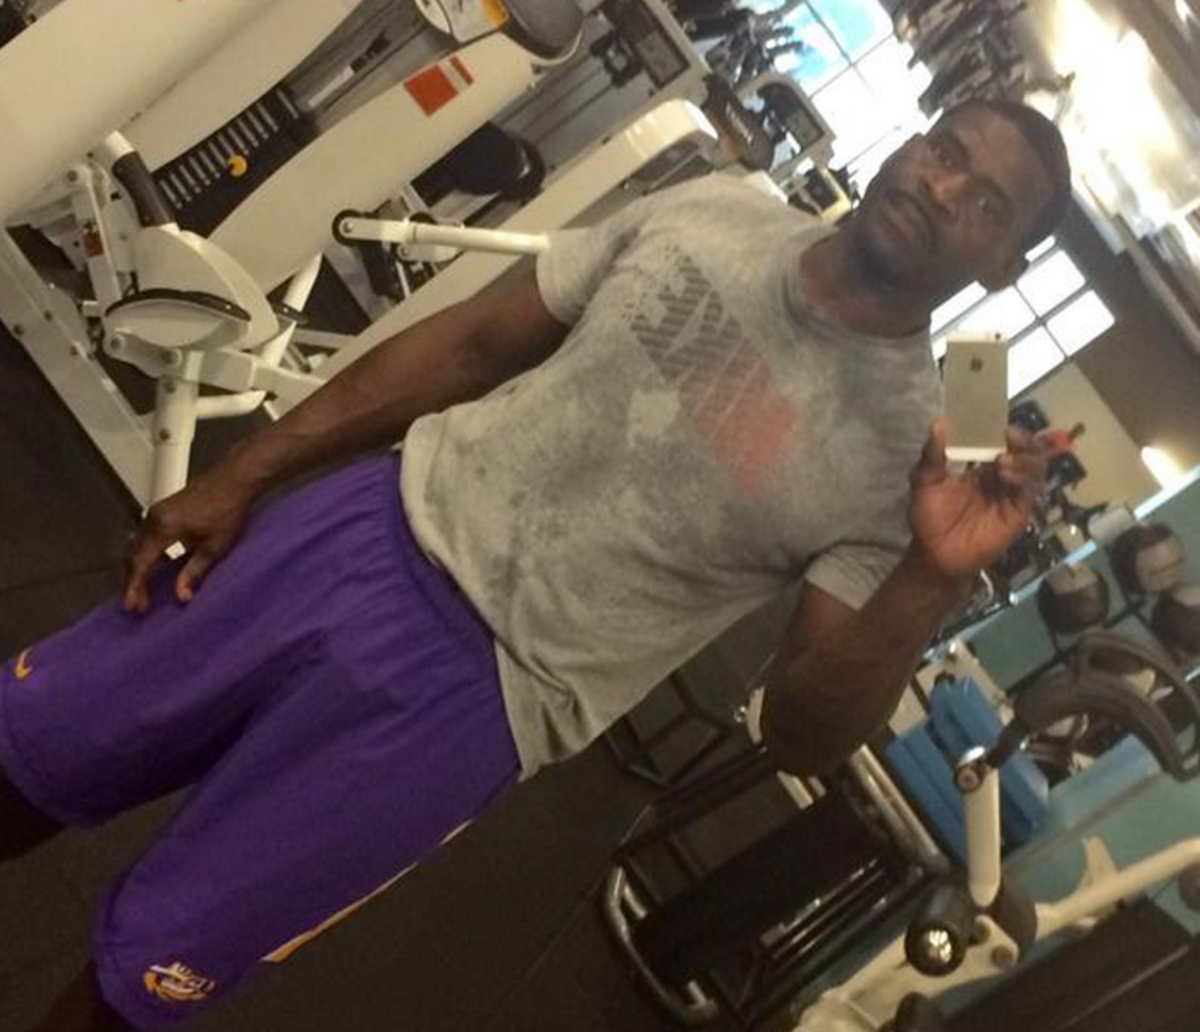 Michael Irvin taking a selfie in LSU shorts after losing a bet.